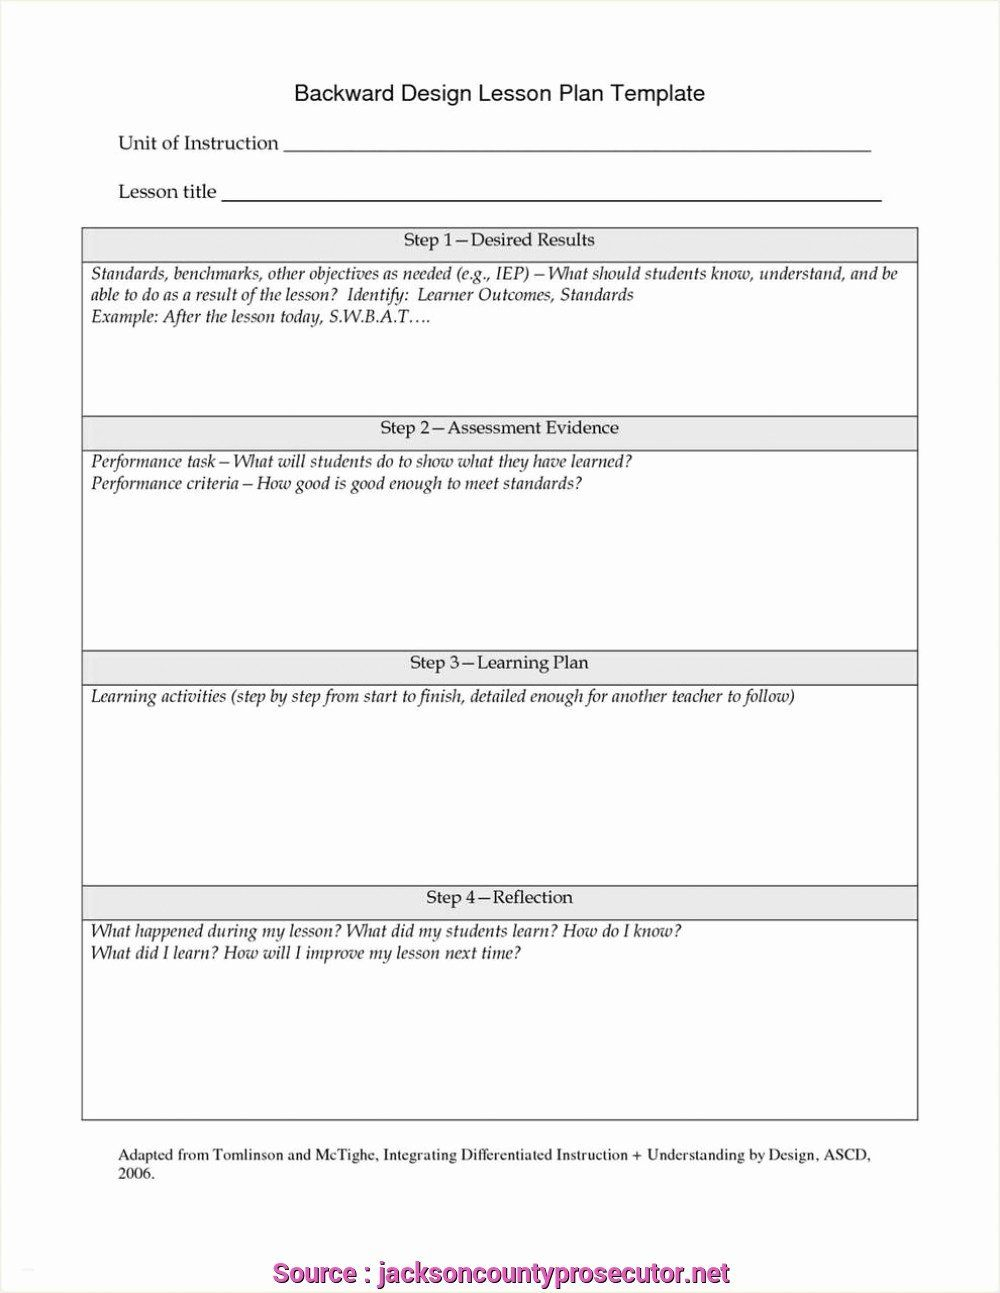 ngss-lesson-plan-template-lesson-plans-learning